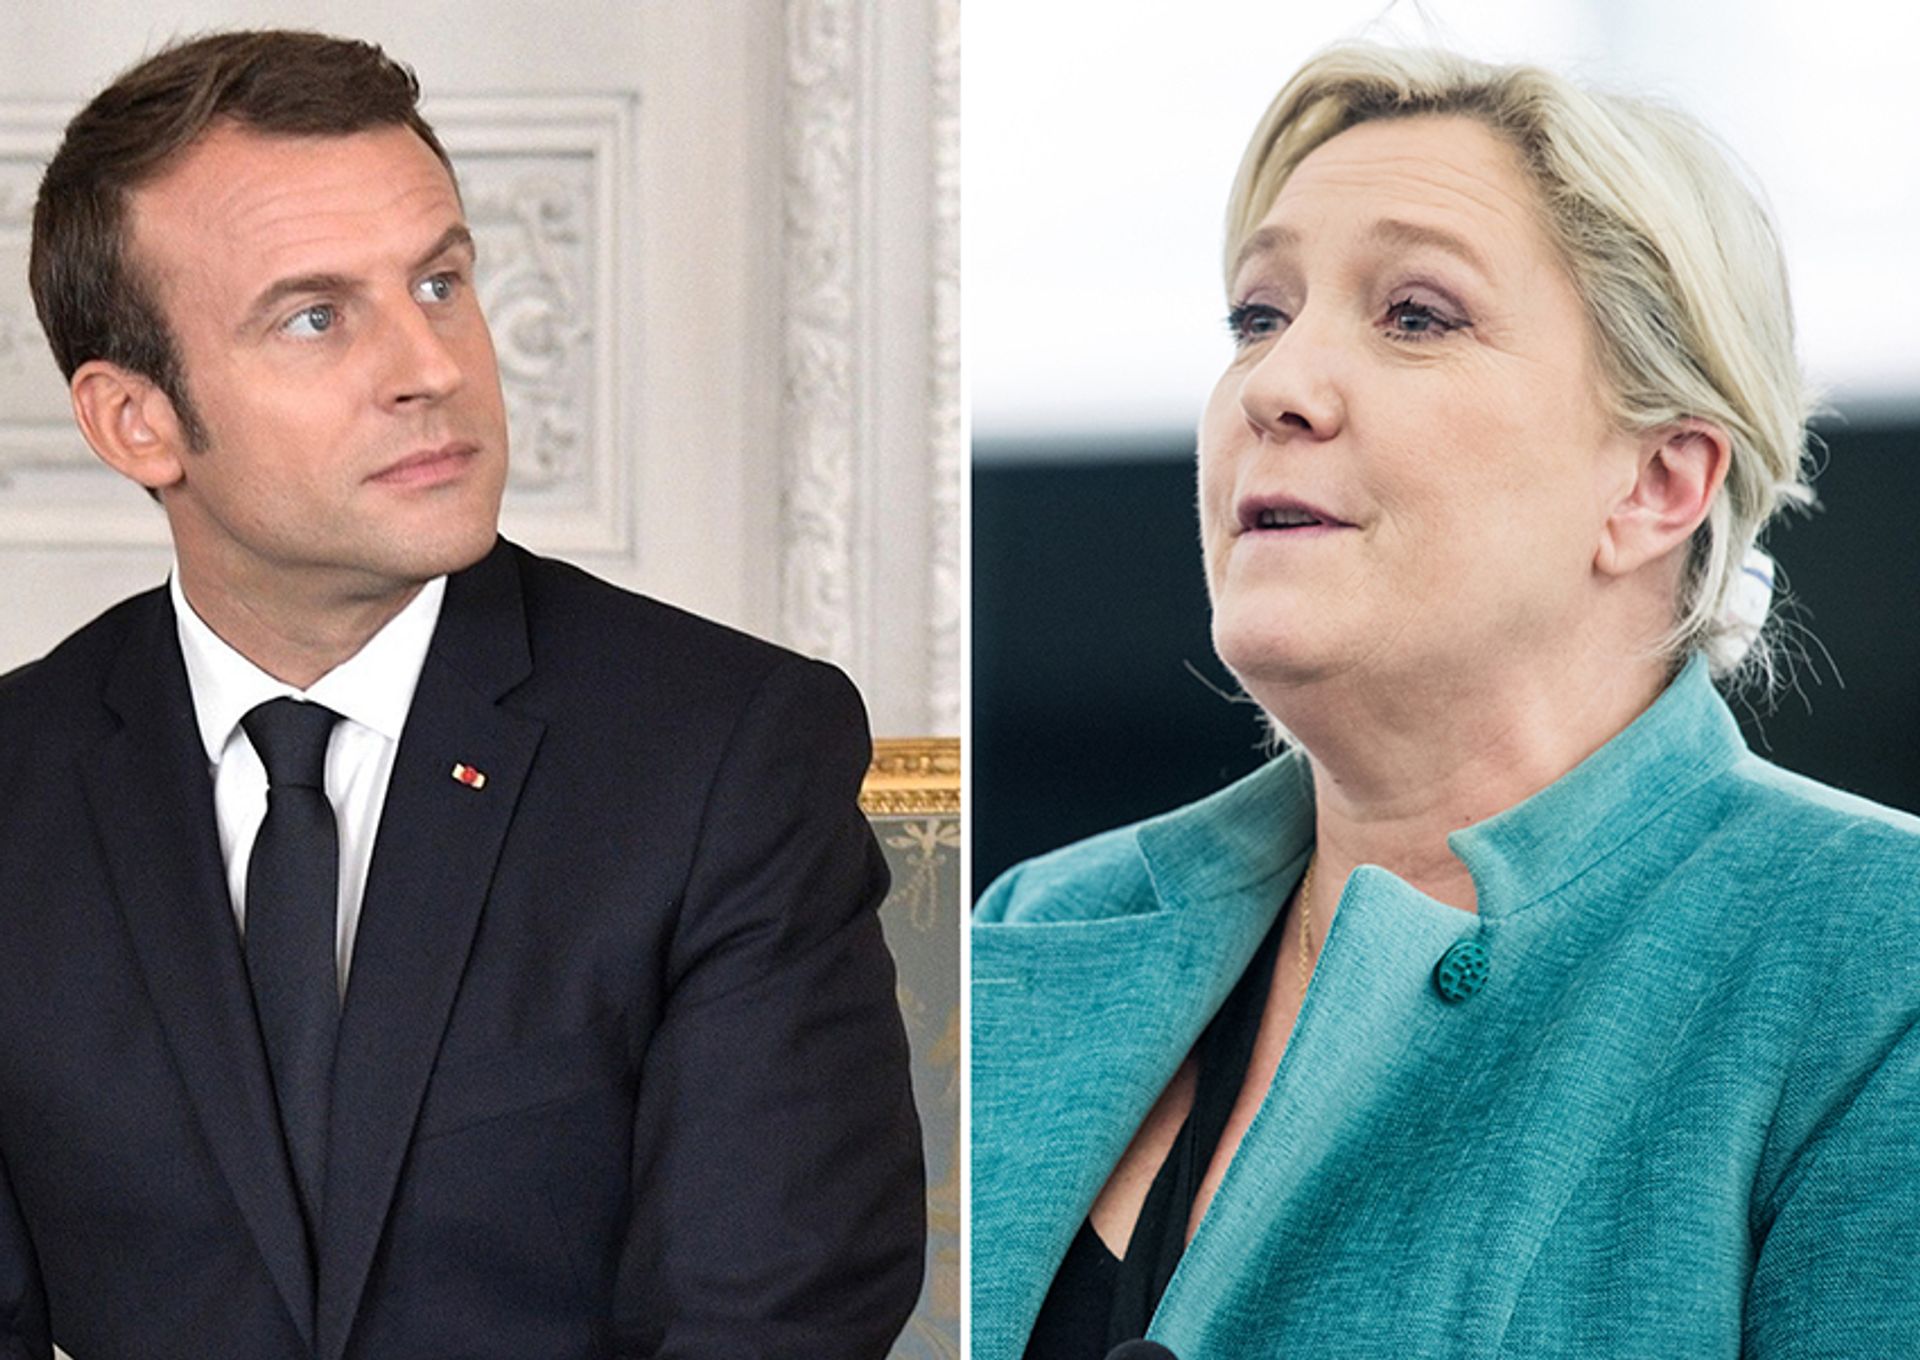 Emmanuel Macron want to create a "European metaverse” to support artists’ creativity and authorship and Marine Le Pen wants to protect national heritage 